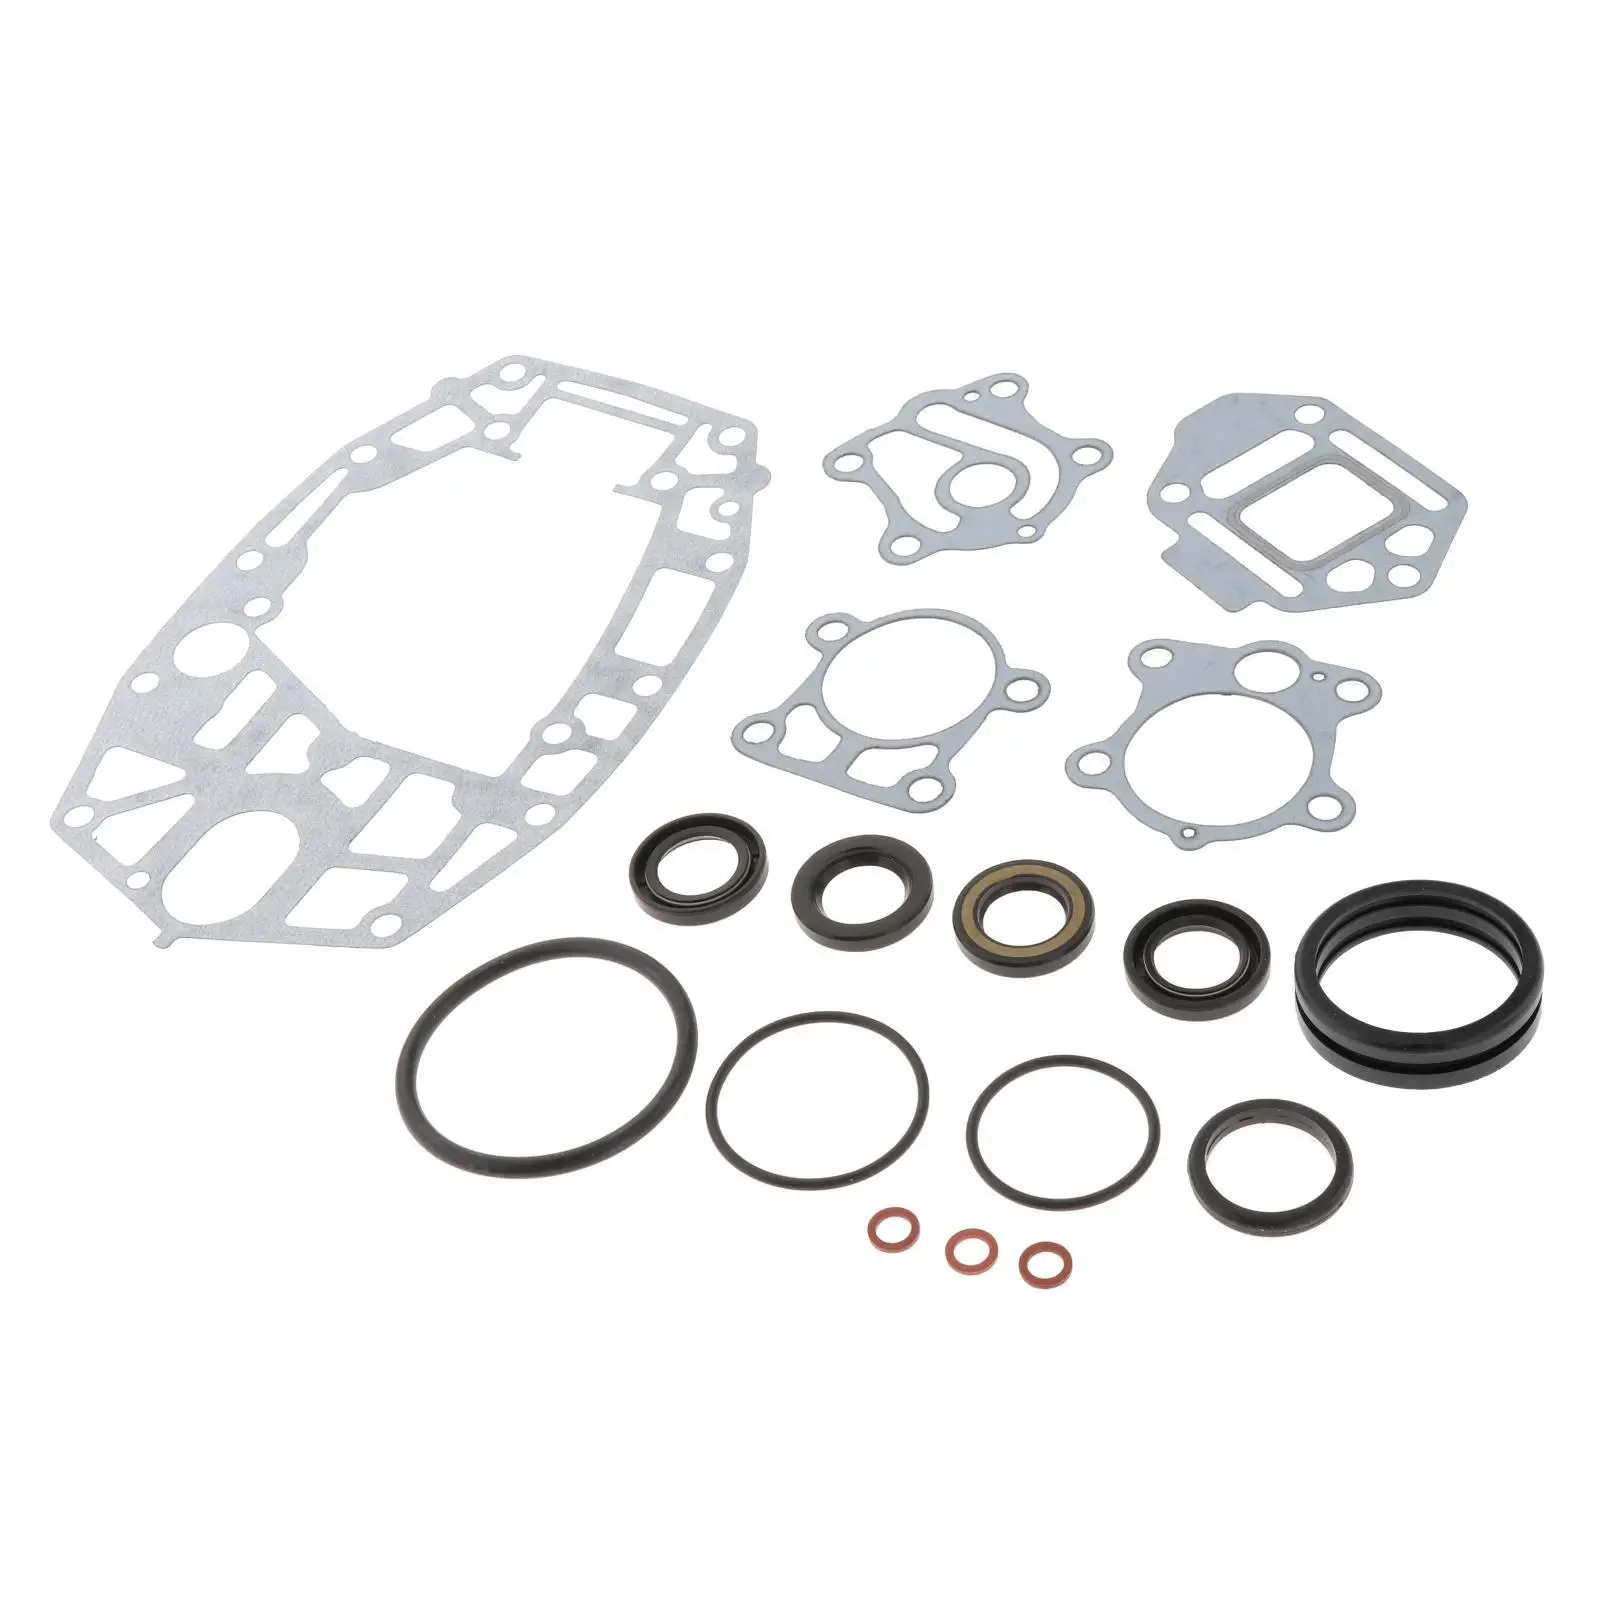 6H4-W0001-20-00 Lower Unit Gasket Kit, Fit for Yamaha Series 30HP 40HP Parts